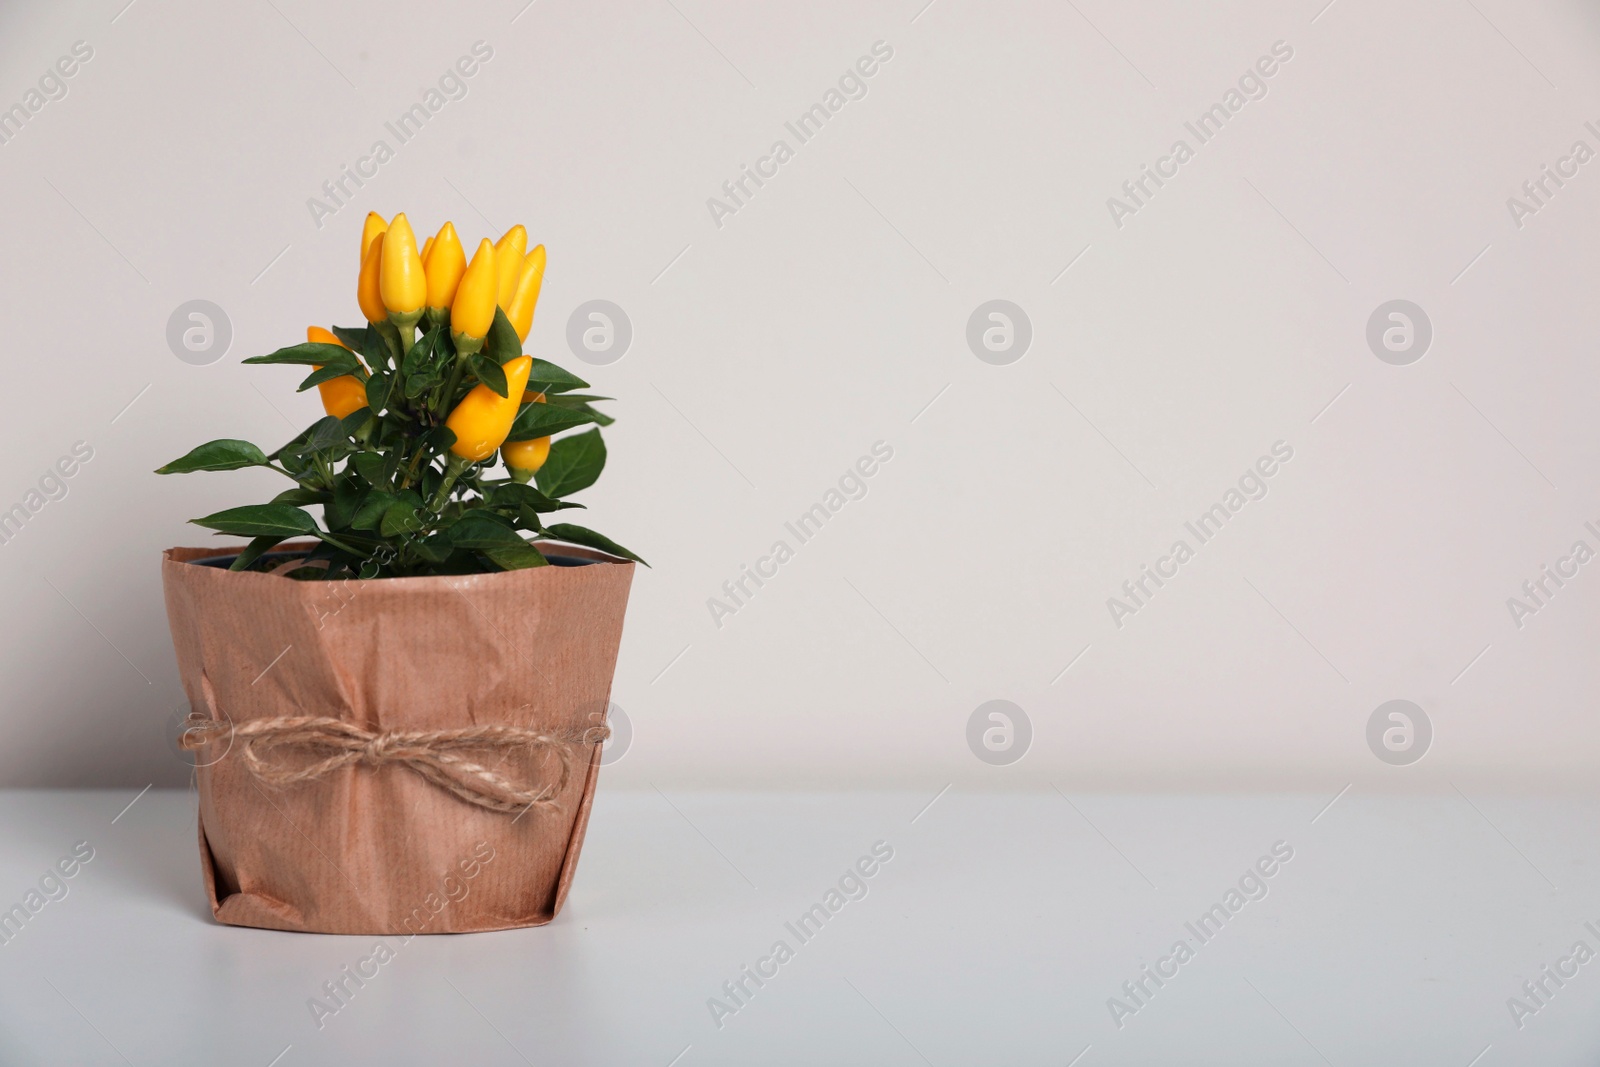 Photo of Capsicum Annuum plant. Potted yellow Chili Pepper on light grey background, space for text